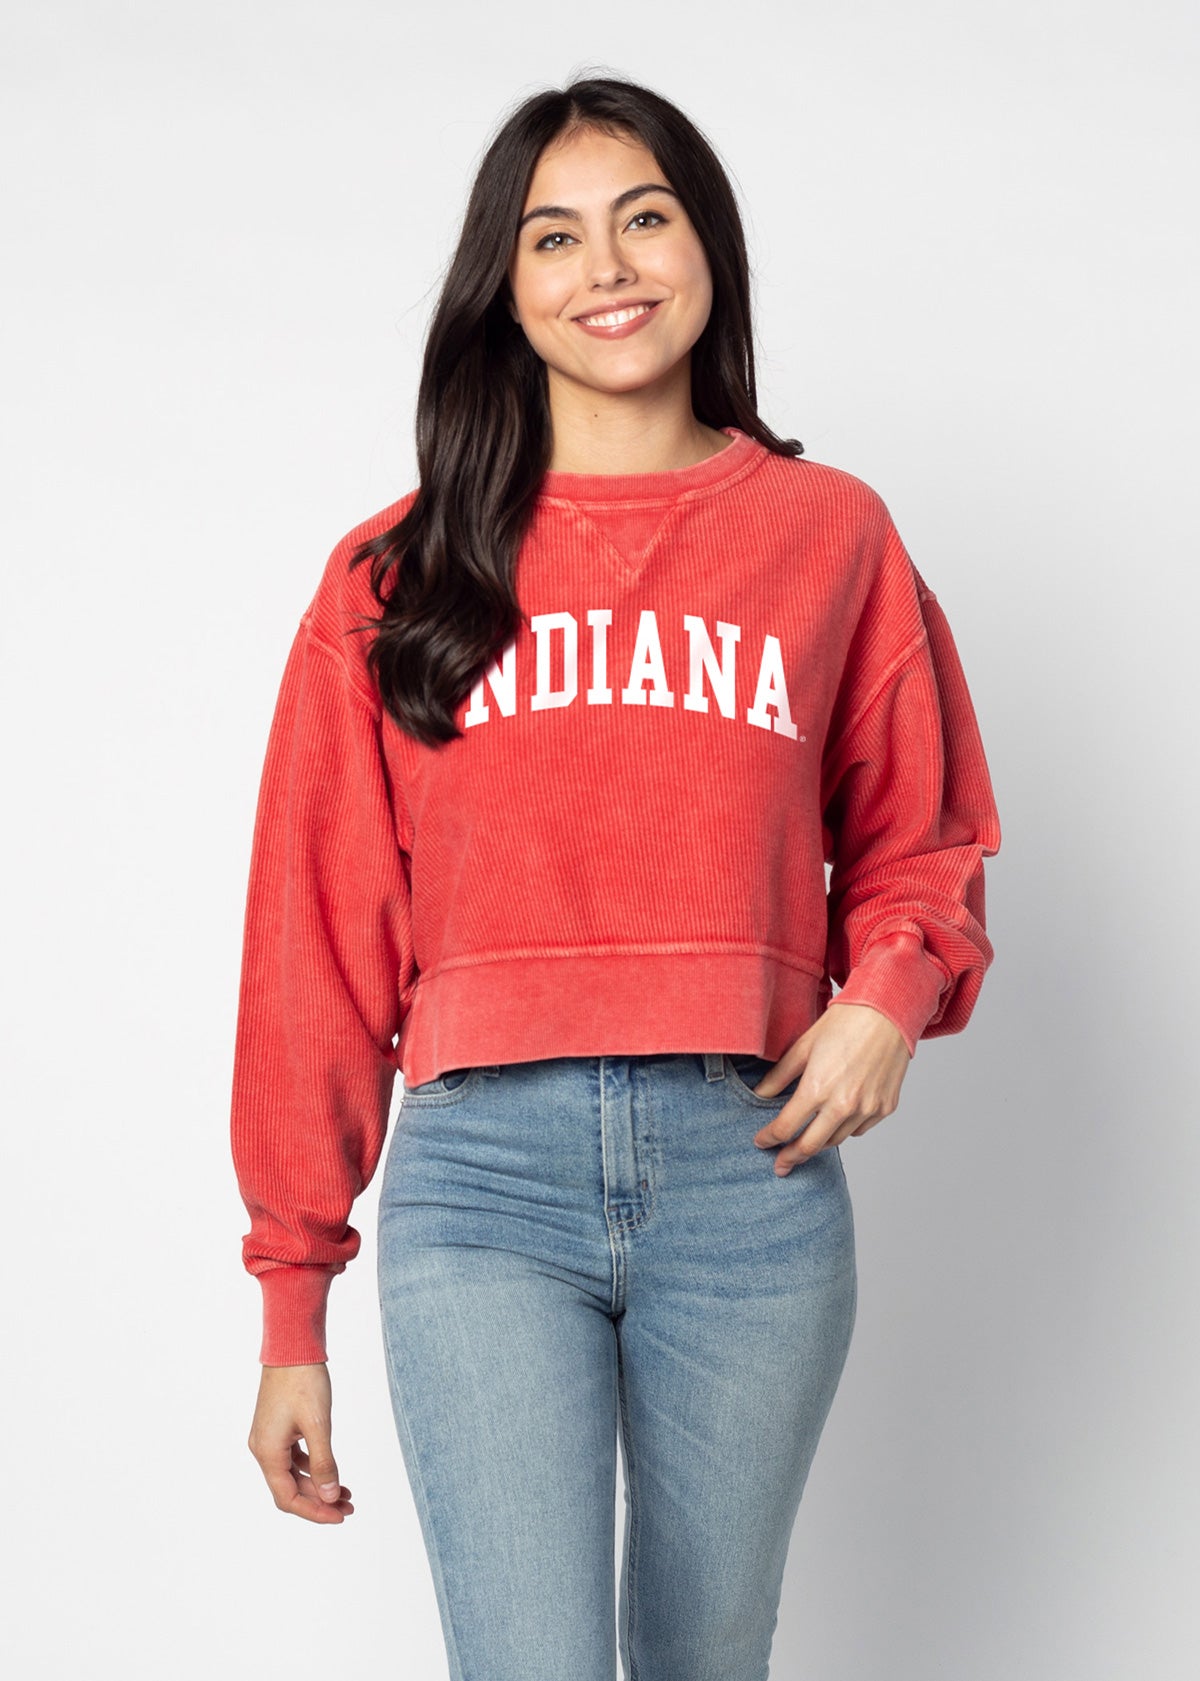 Corded Boxy Pullover Indiana Hoosiers in Crimson